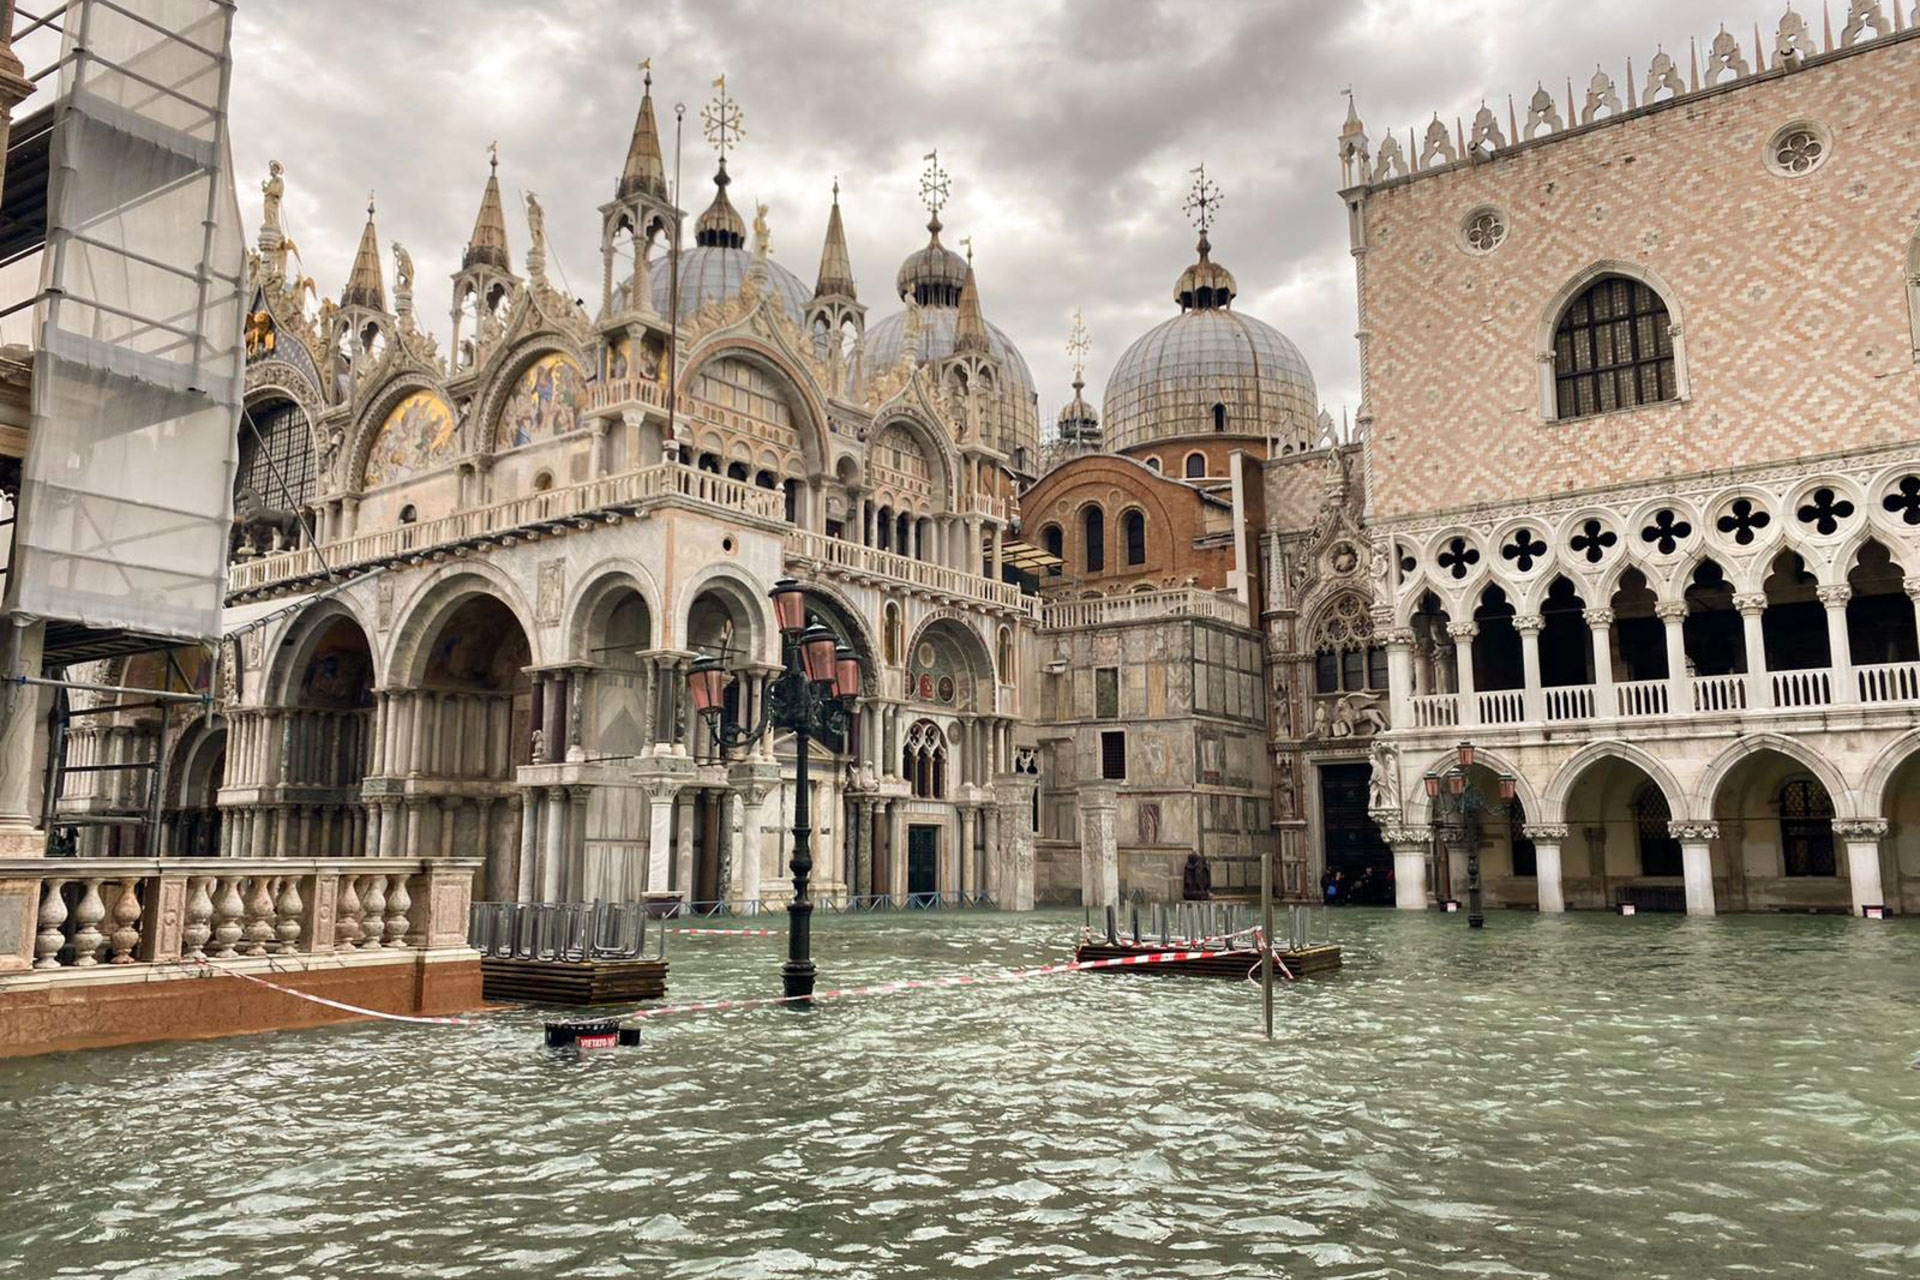 Venice, ?1 billion in damage. Franceschini urges people to donate with sms for the city at 45500